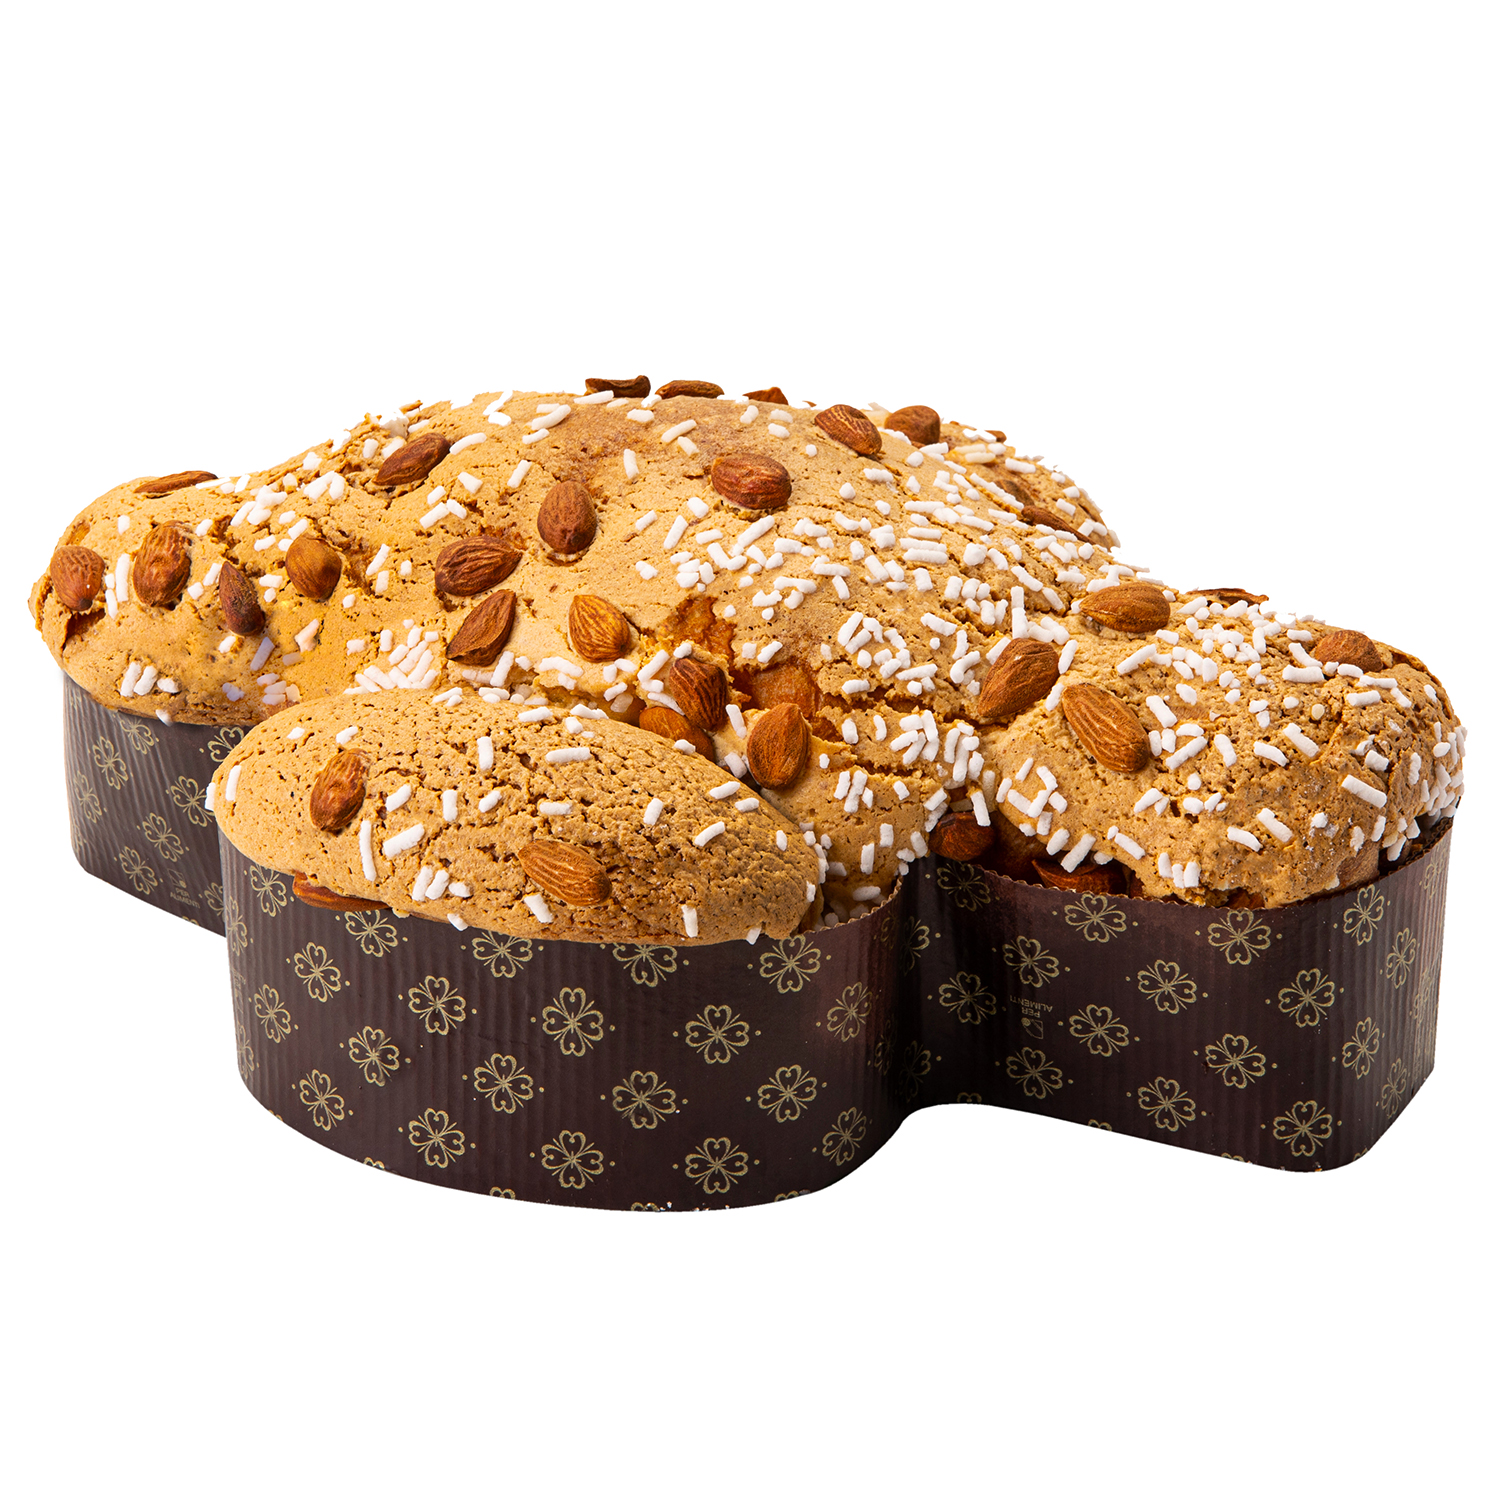 Traditional colomba Baked goods